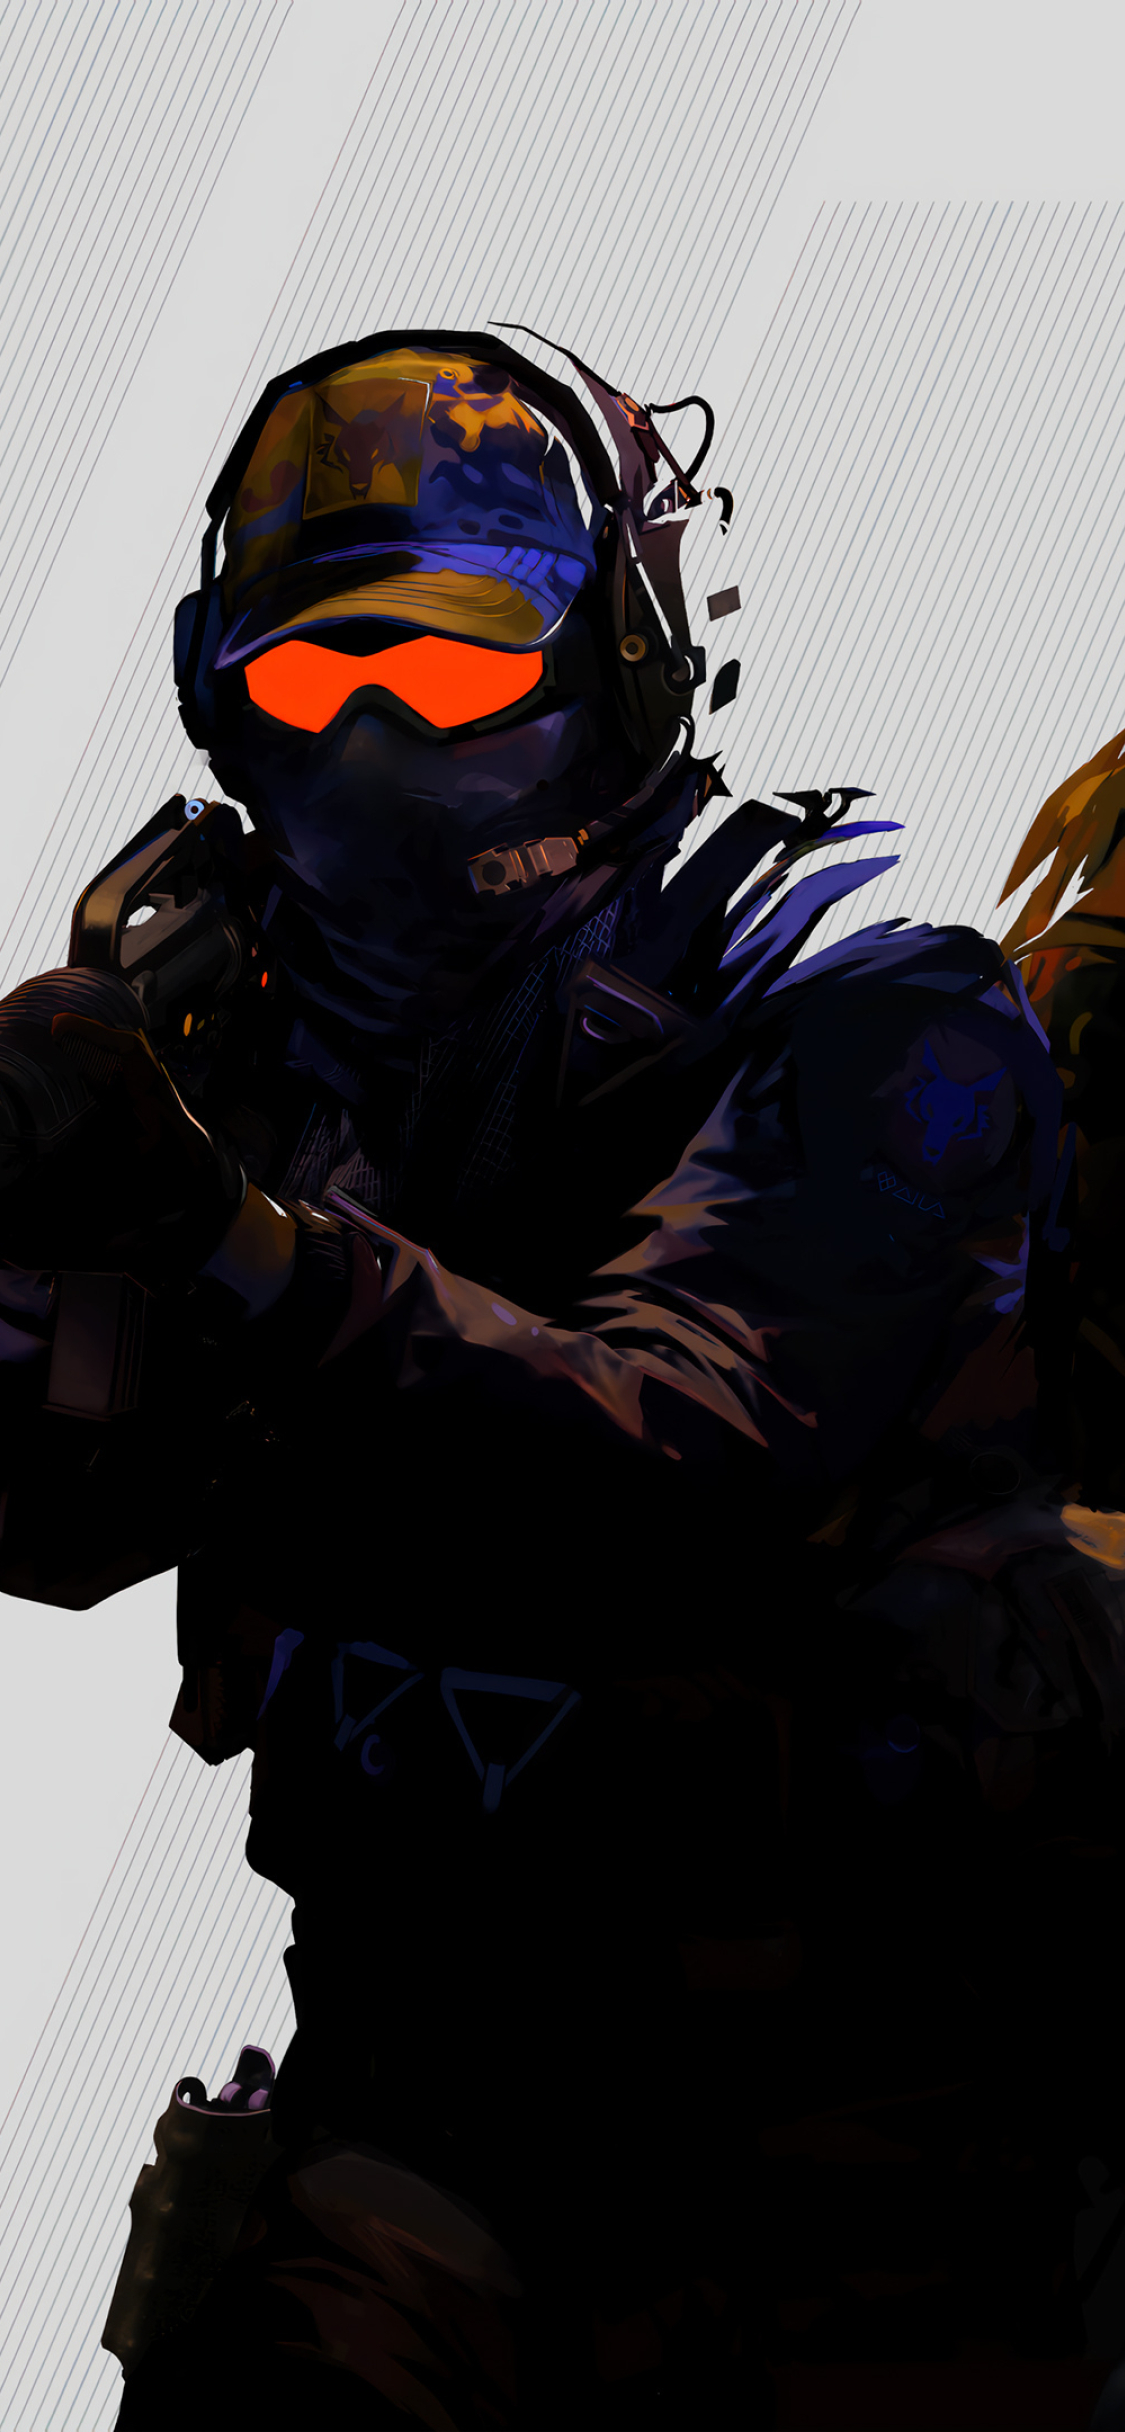 1125x2432 Resolution Counter Strike 2 Gaming Poster 1125x2432 ...